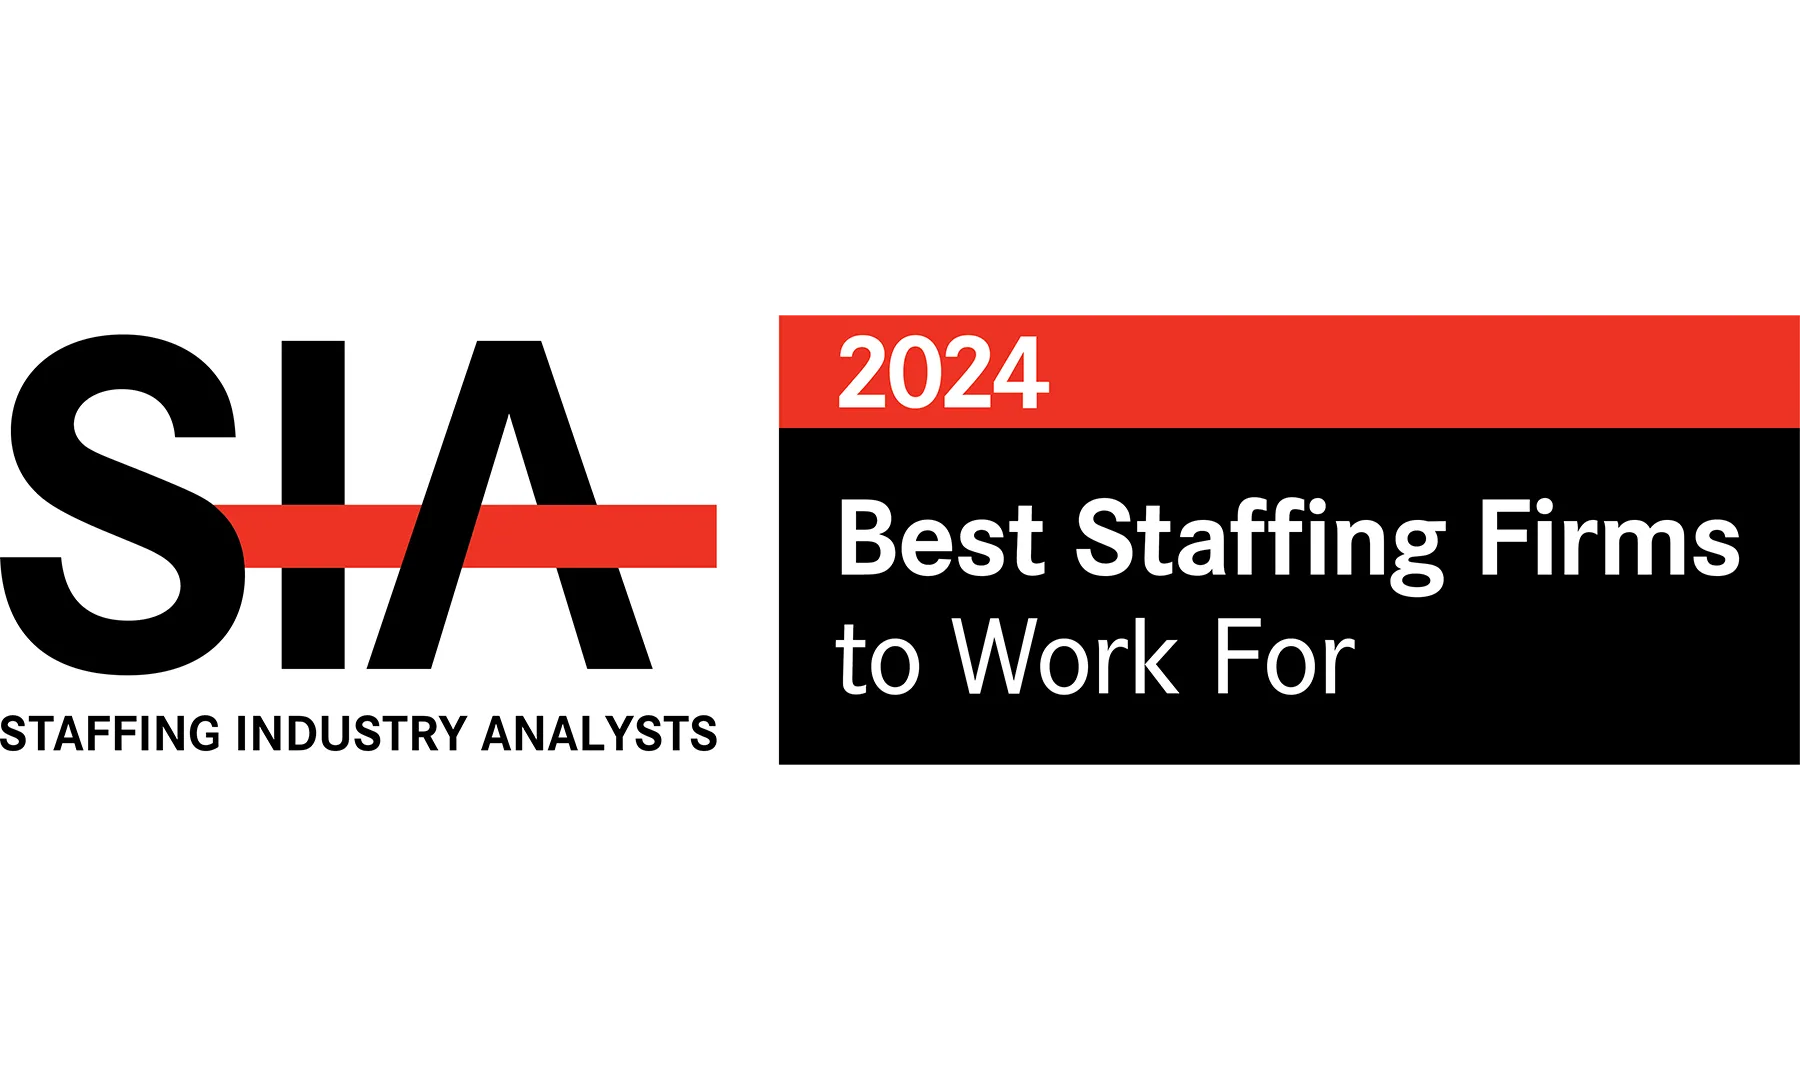 SIA 2024 Best Staffing Firms to Work For